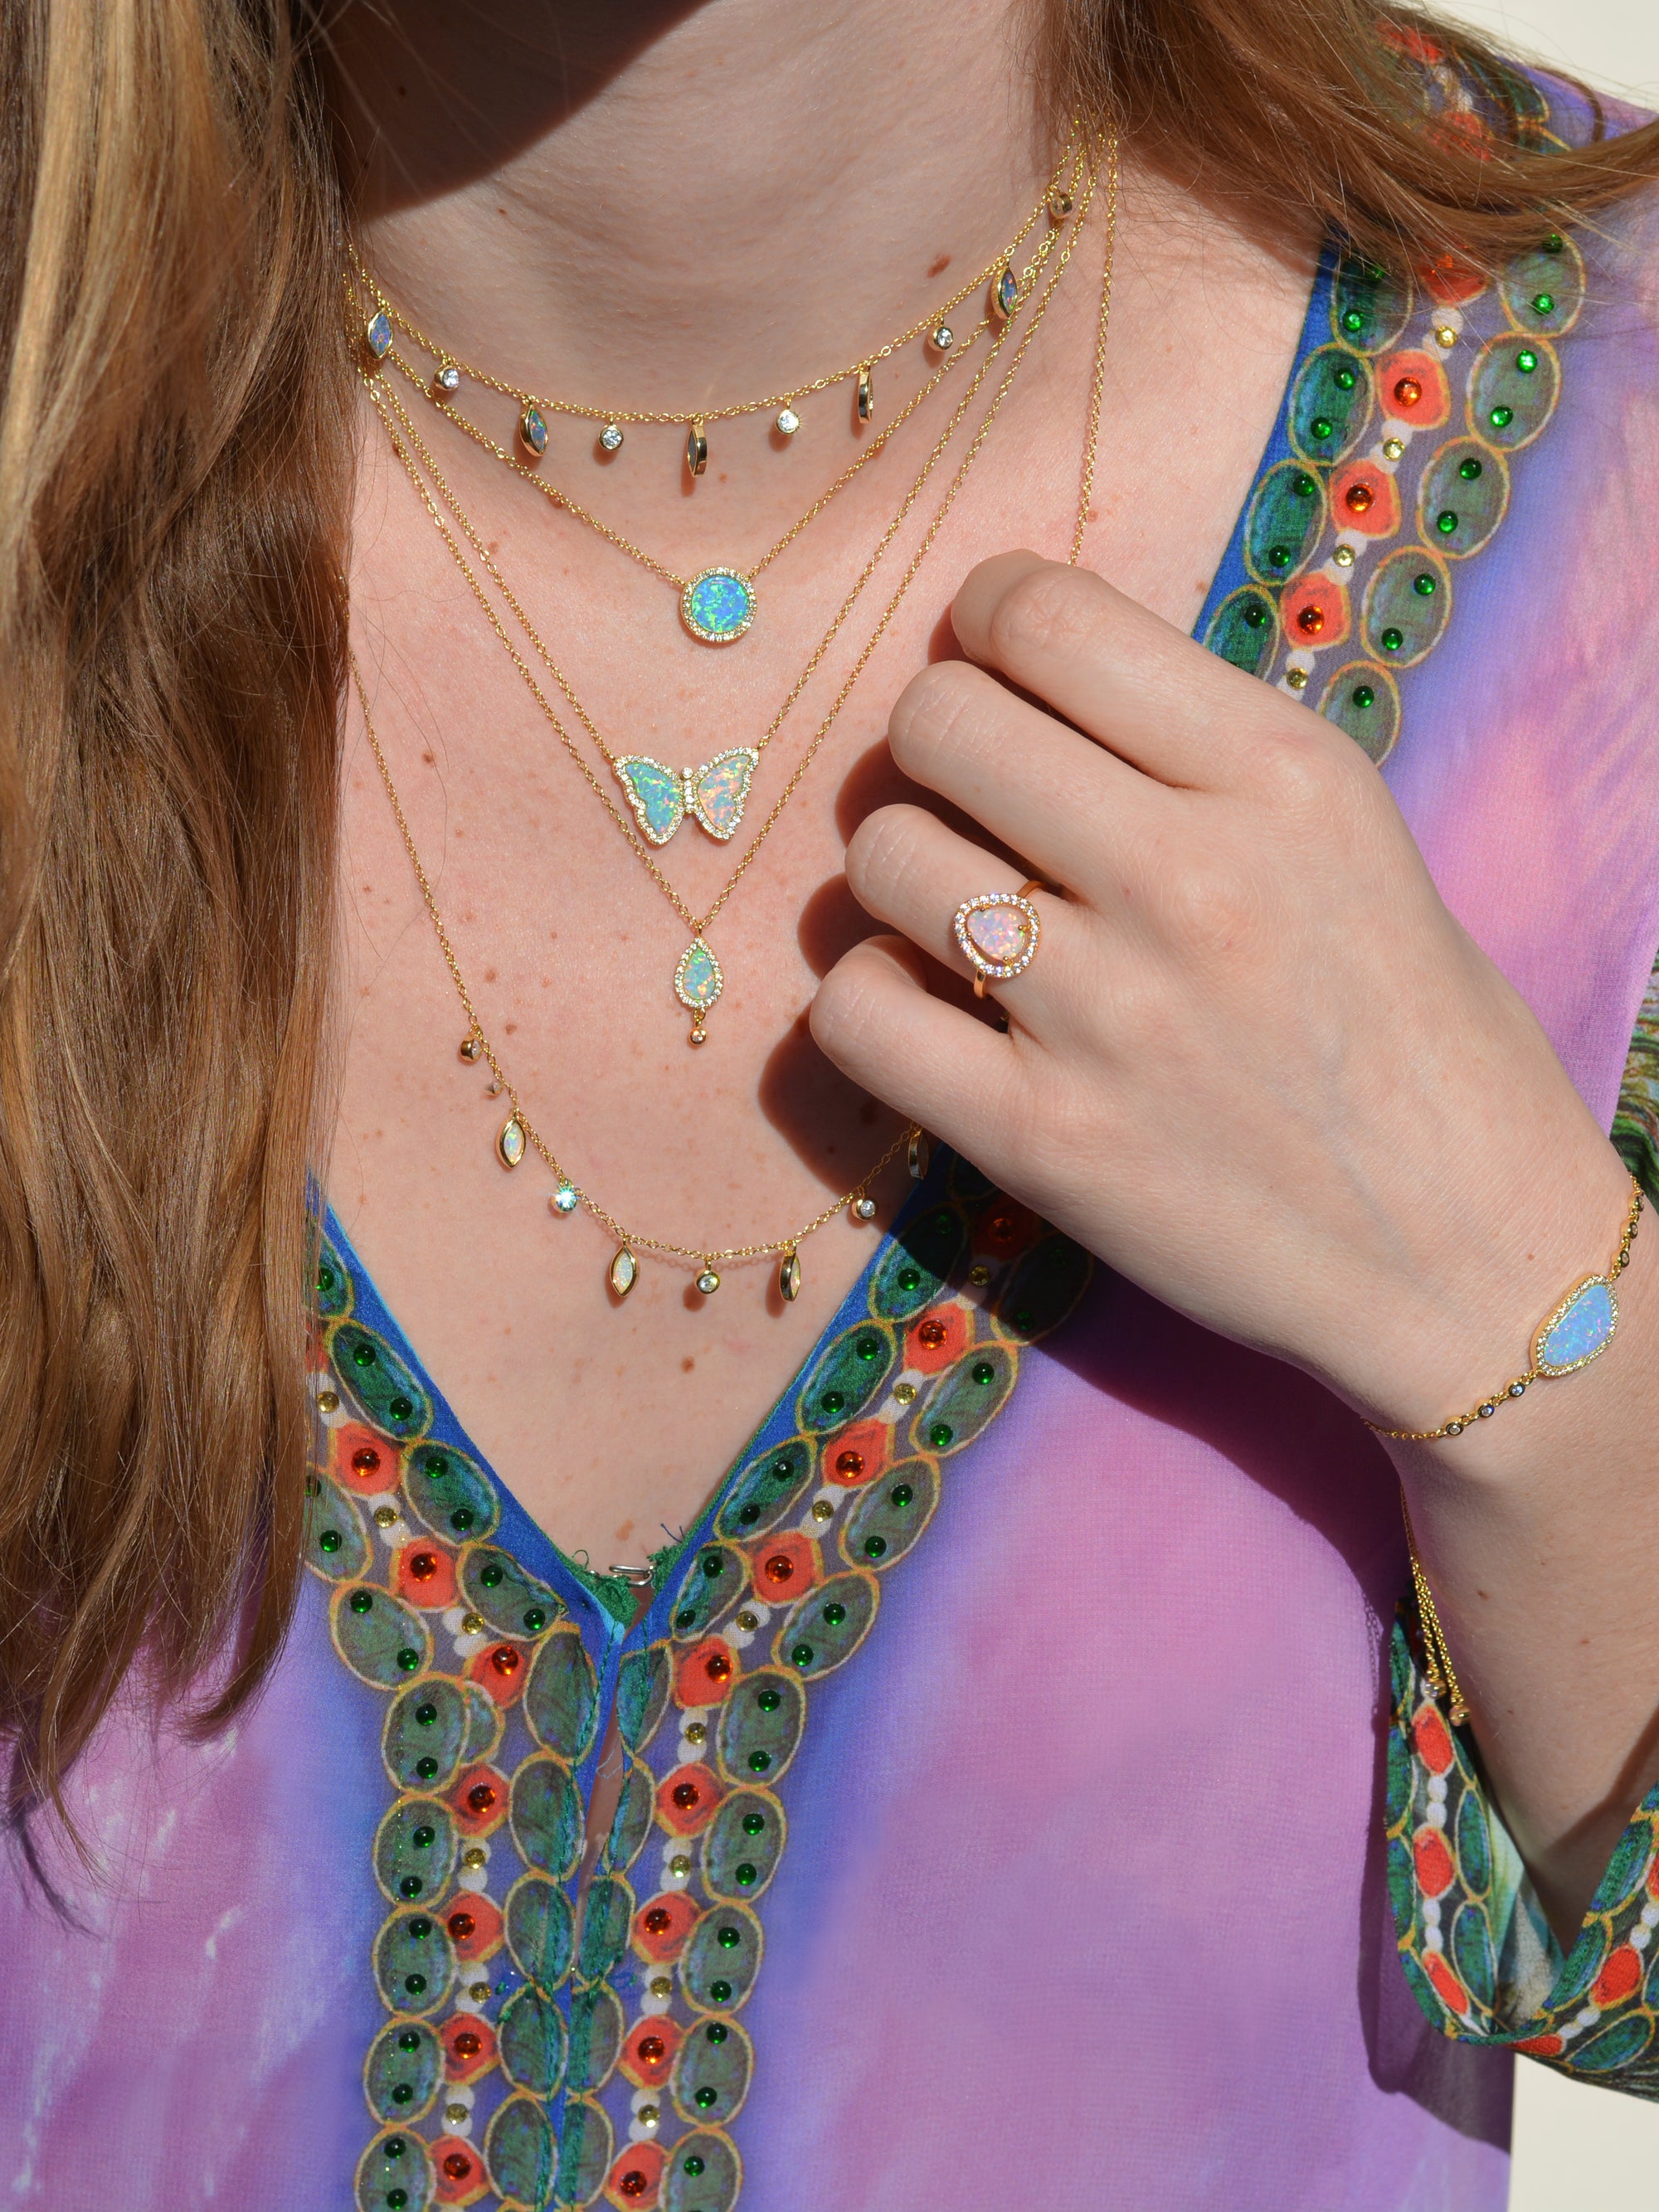 Drops of Spring Opal Necklace